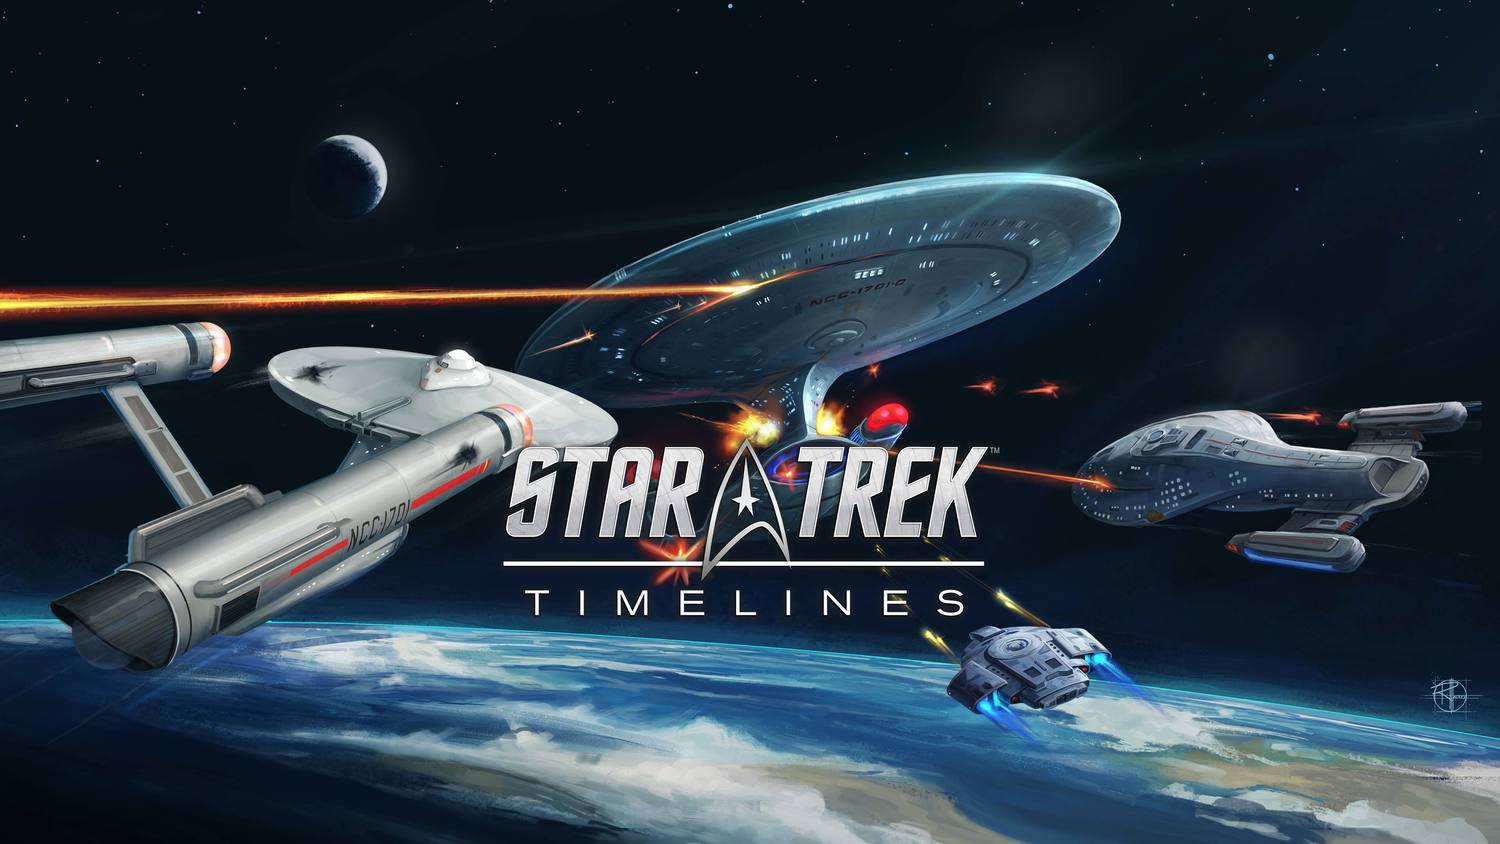 Star Trek: Timelines Has an Awesome and Well-Hidden Next Generation Easter Egg